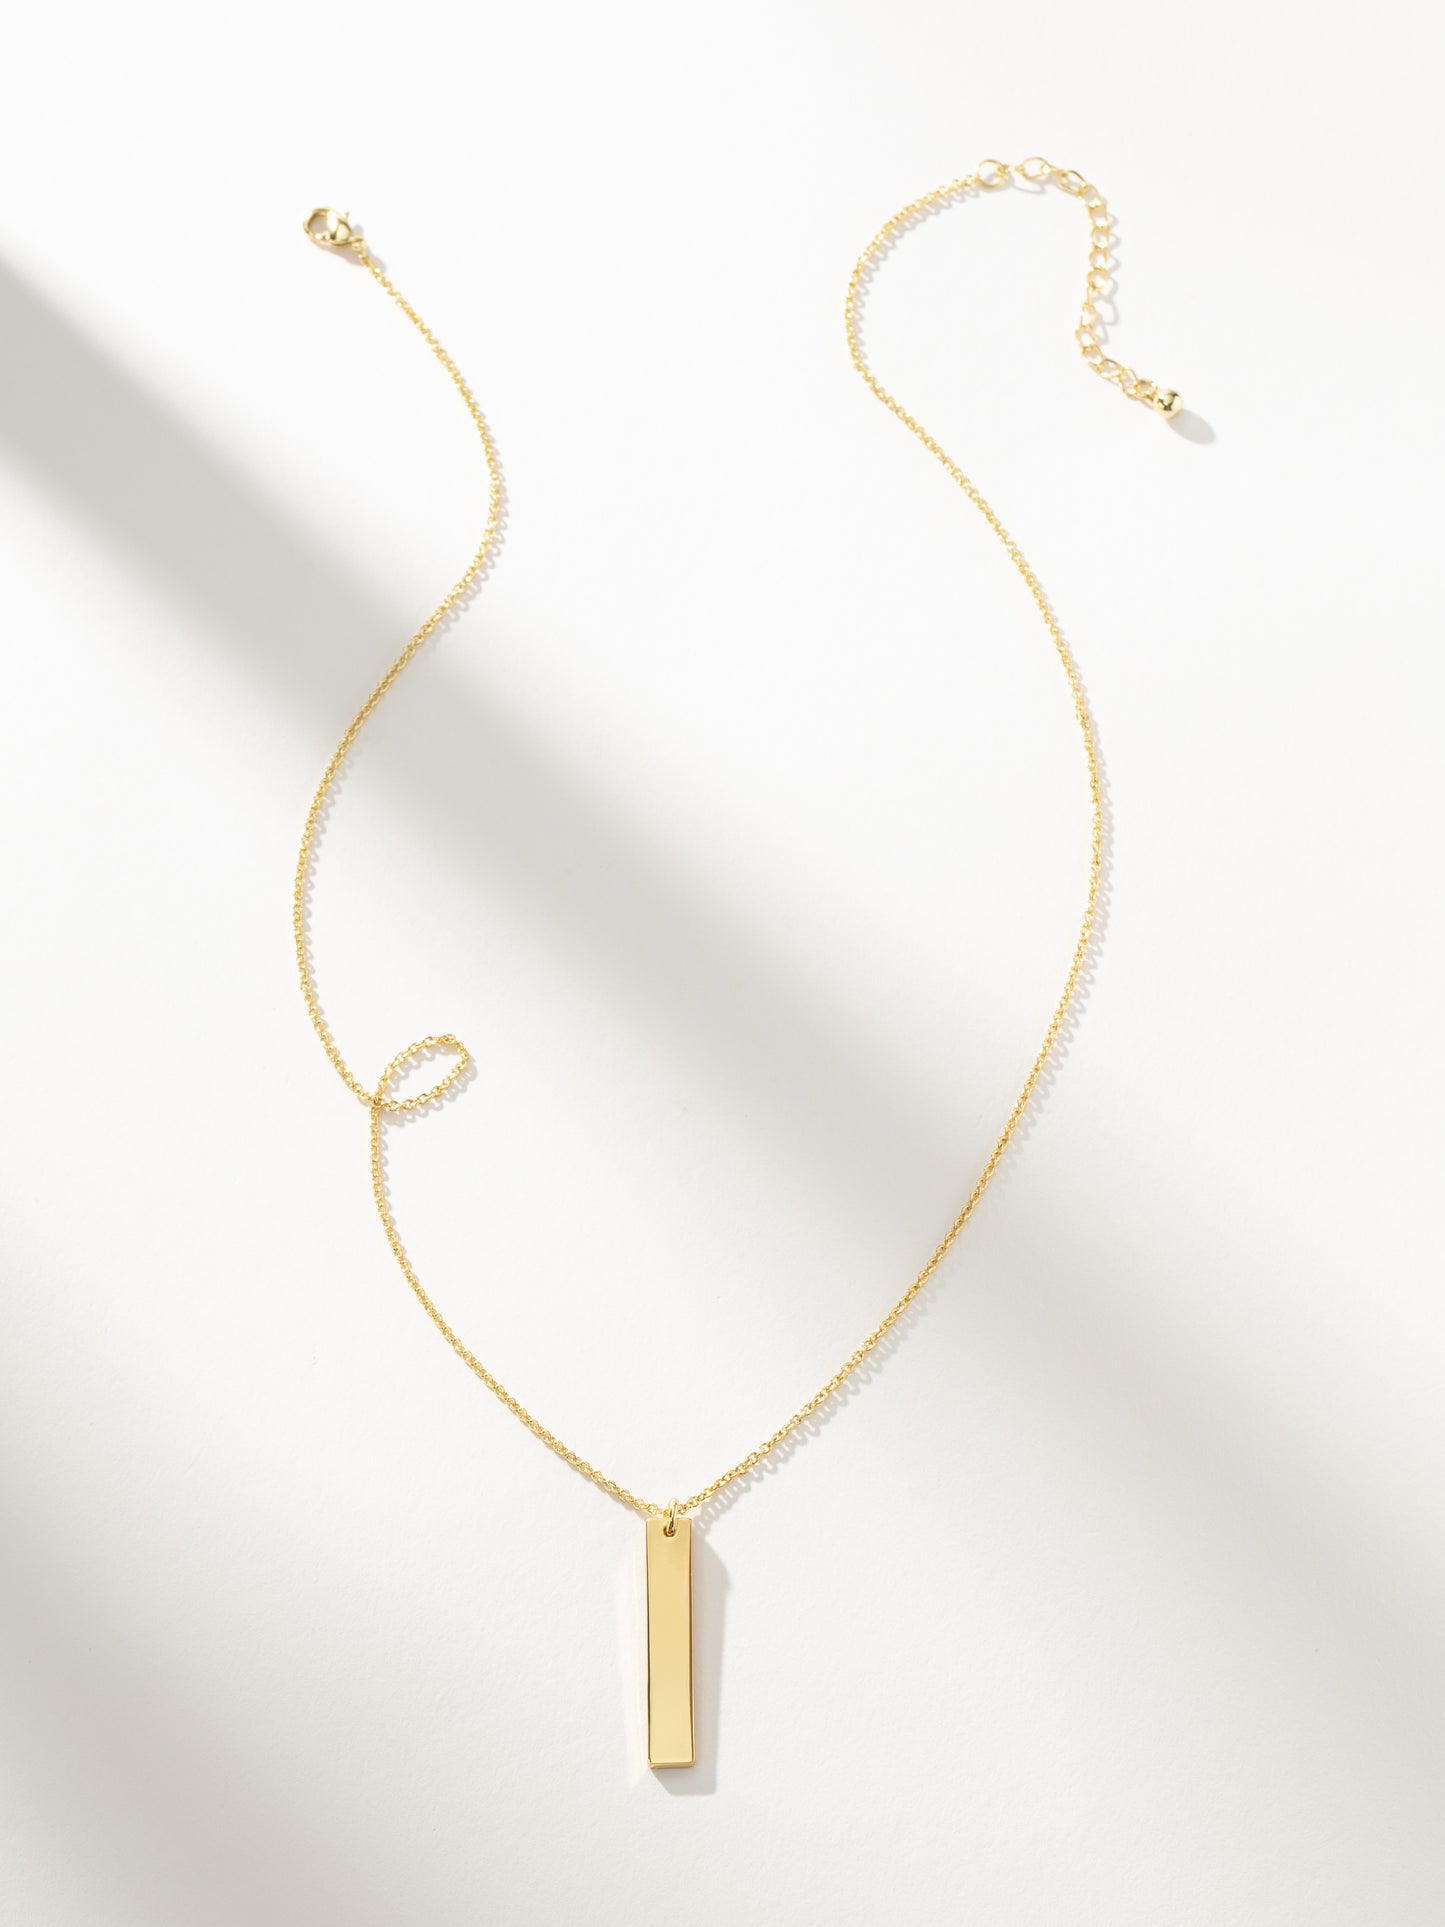 Vertical Bar Necklace | Gold | Product Image | Uncommon James